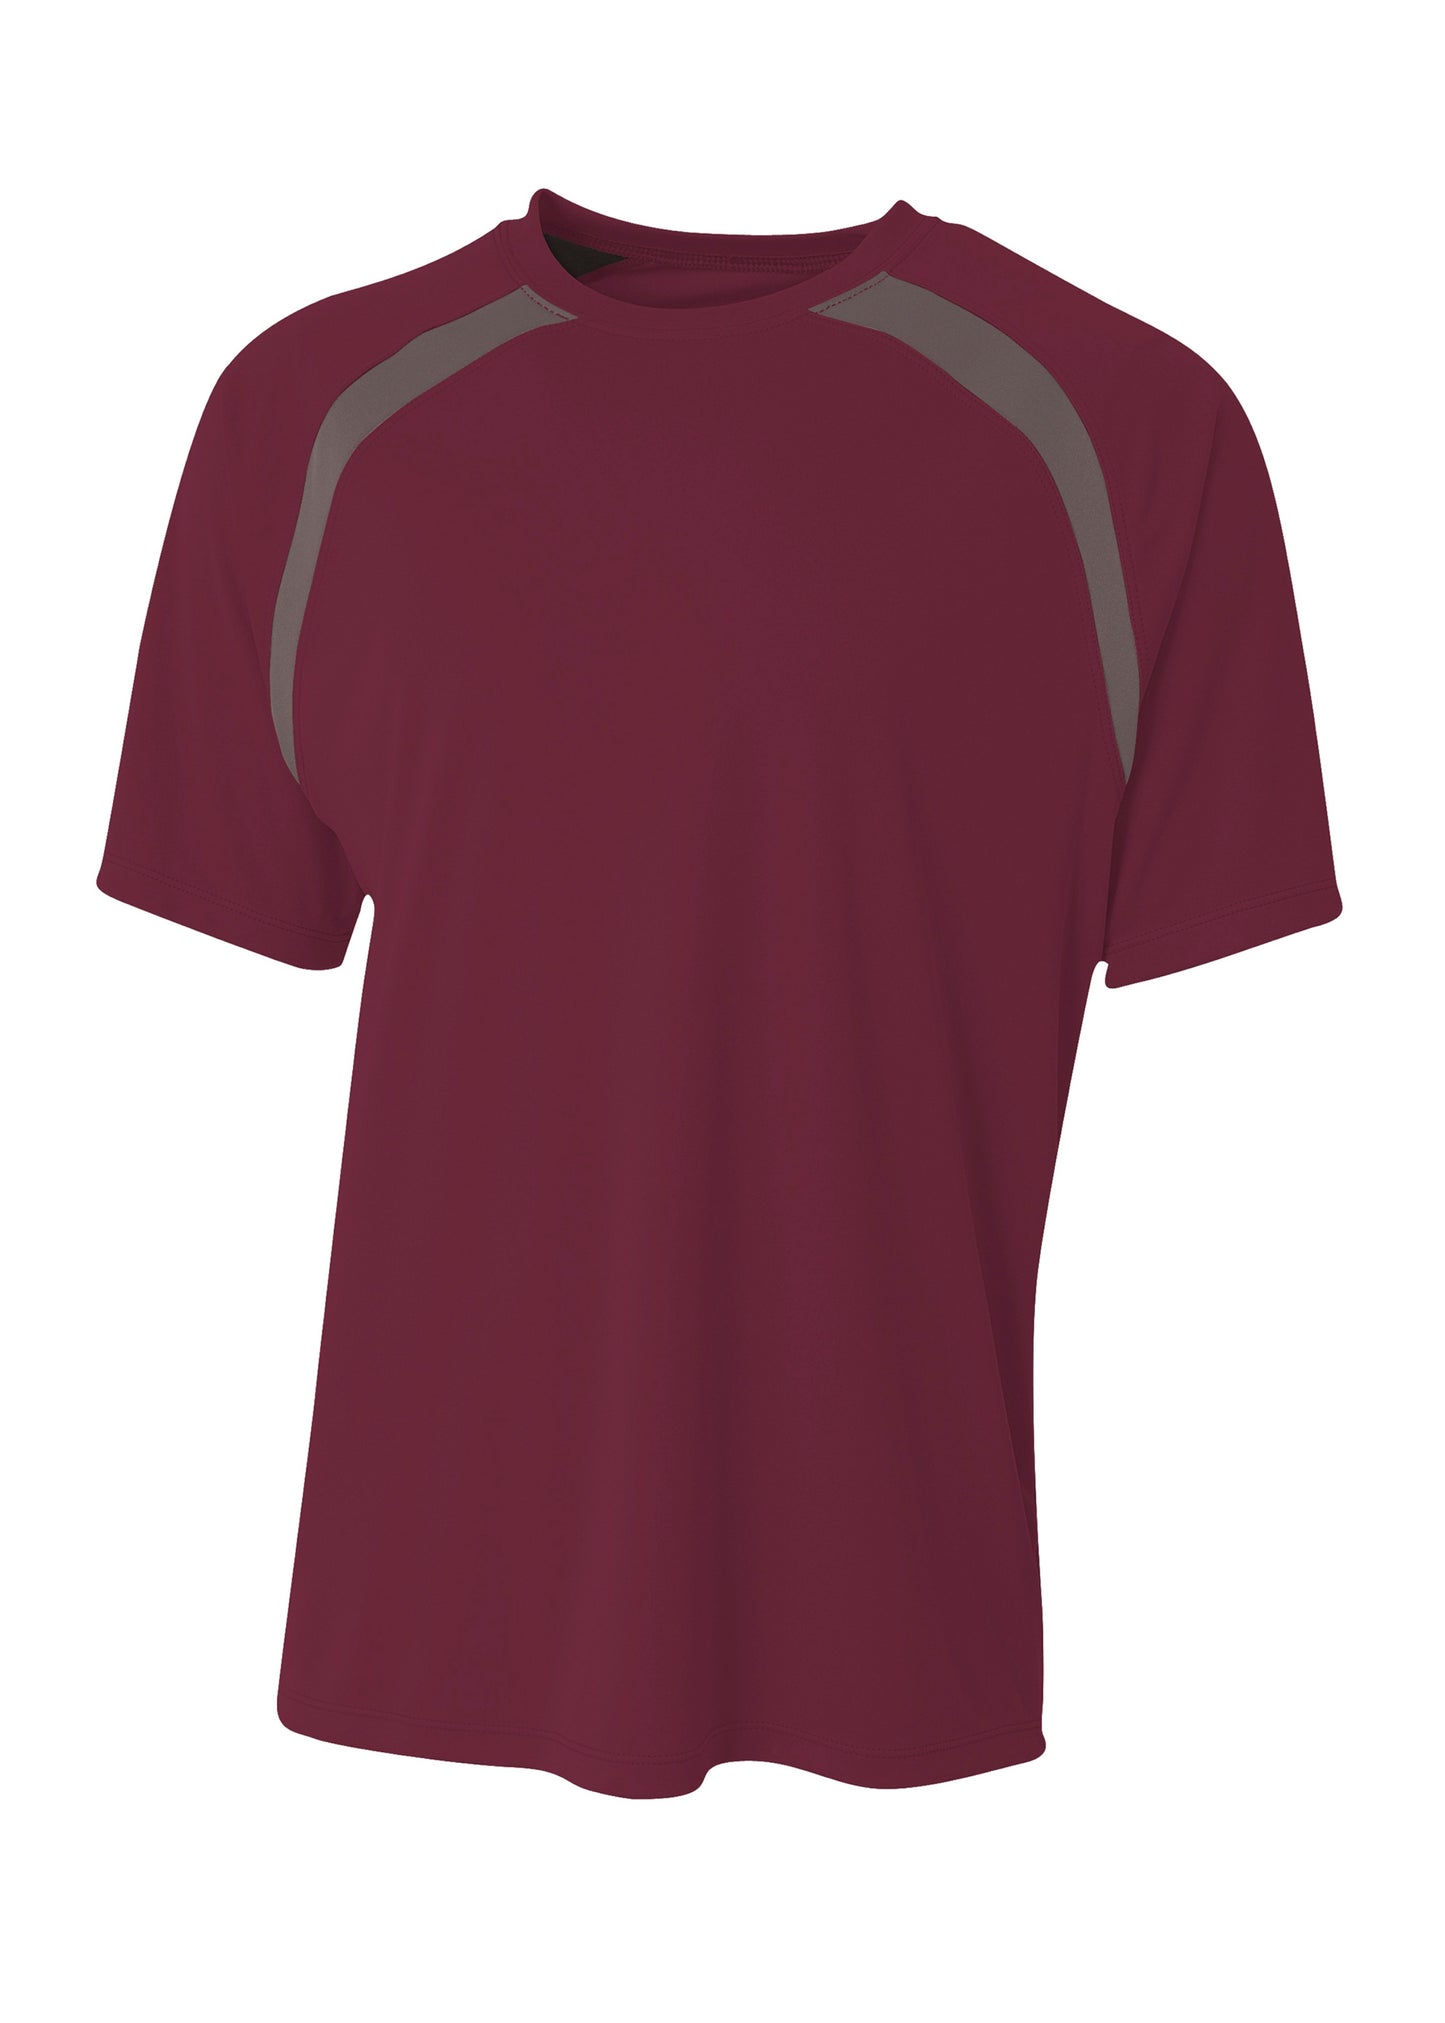 Photo of A4 SHIRTS N3001  color  MAROON/GRAPHITE